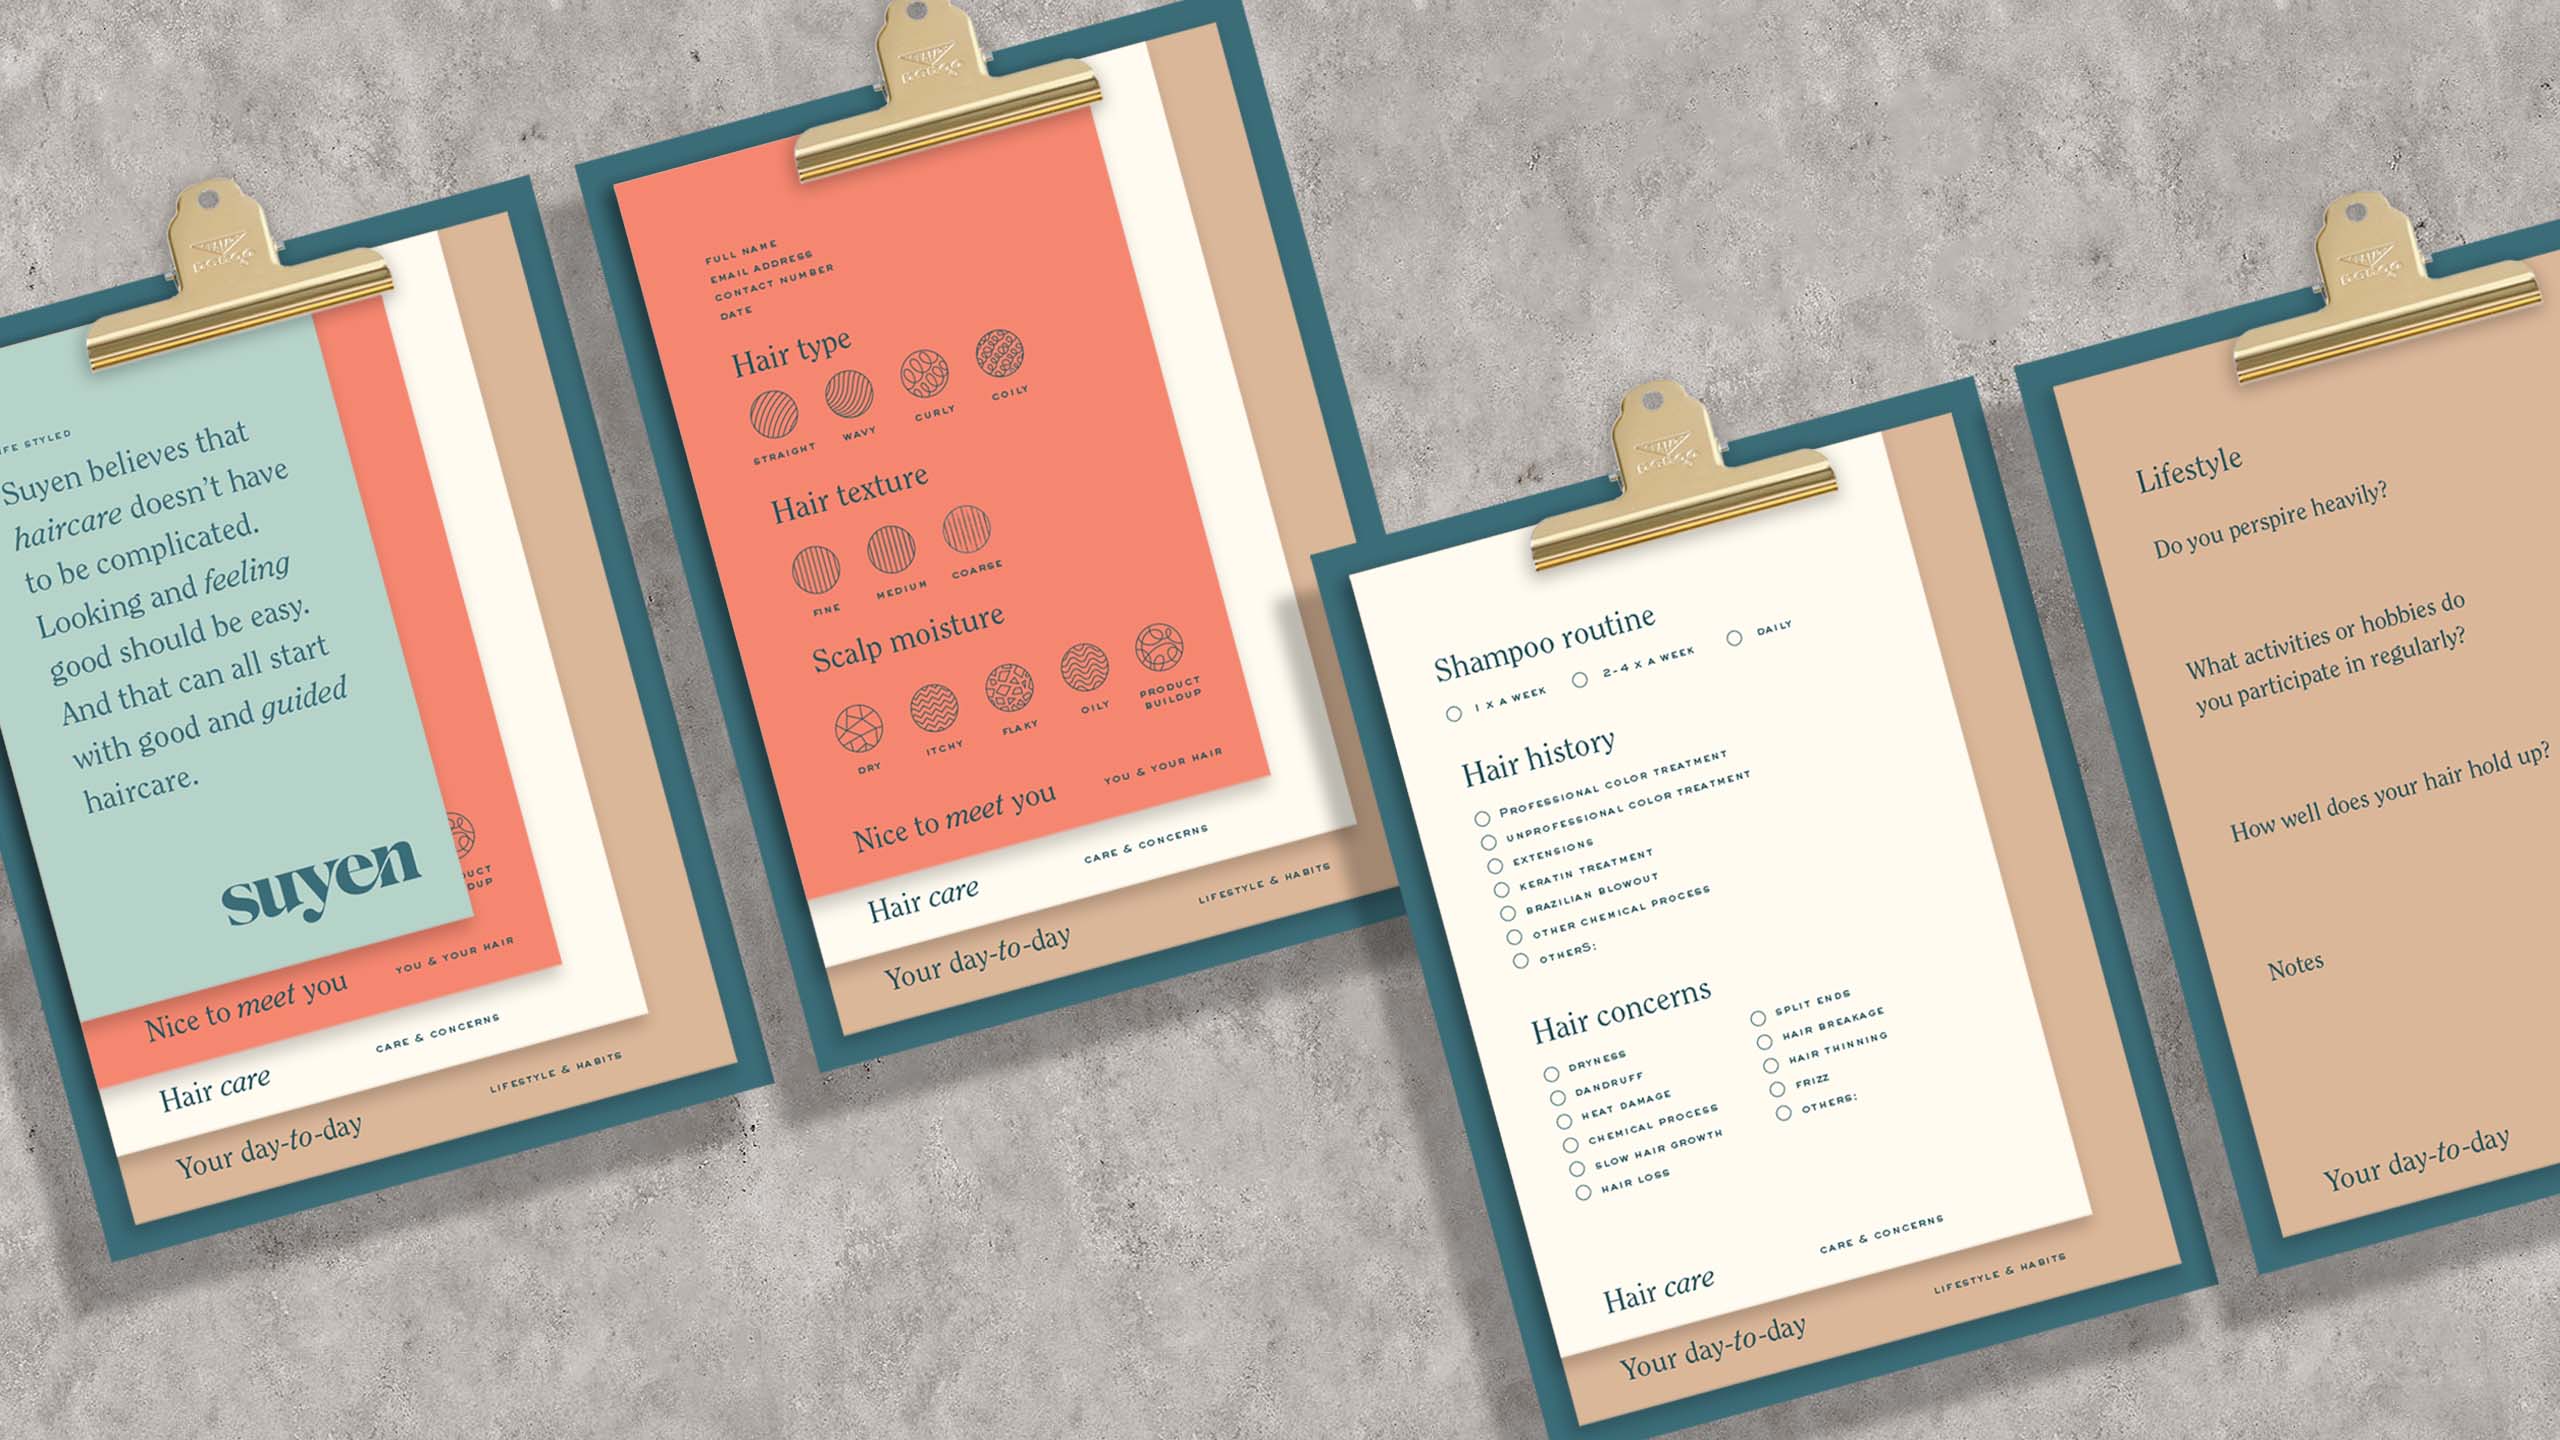 Branding applied on menu and consultation sheets for hairstylist and brand Styled by Suyen